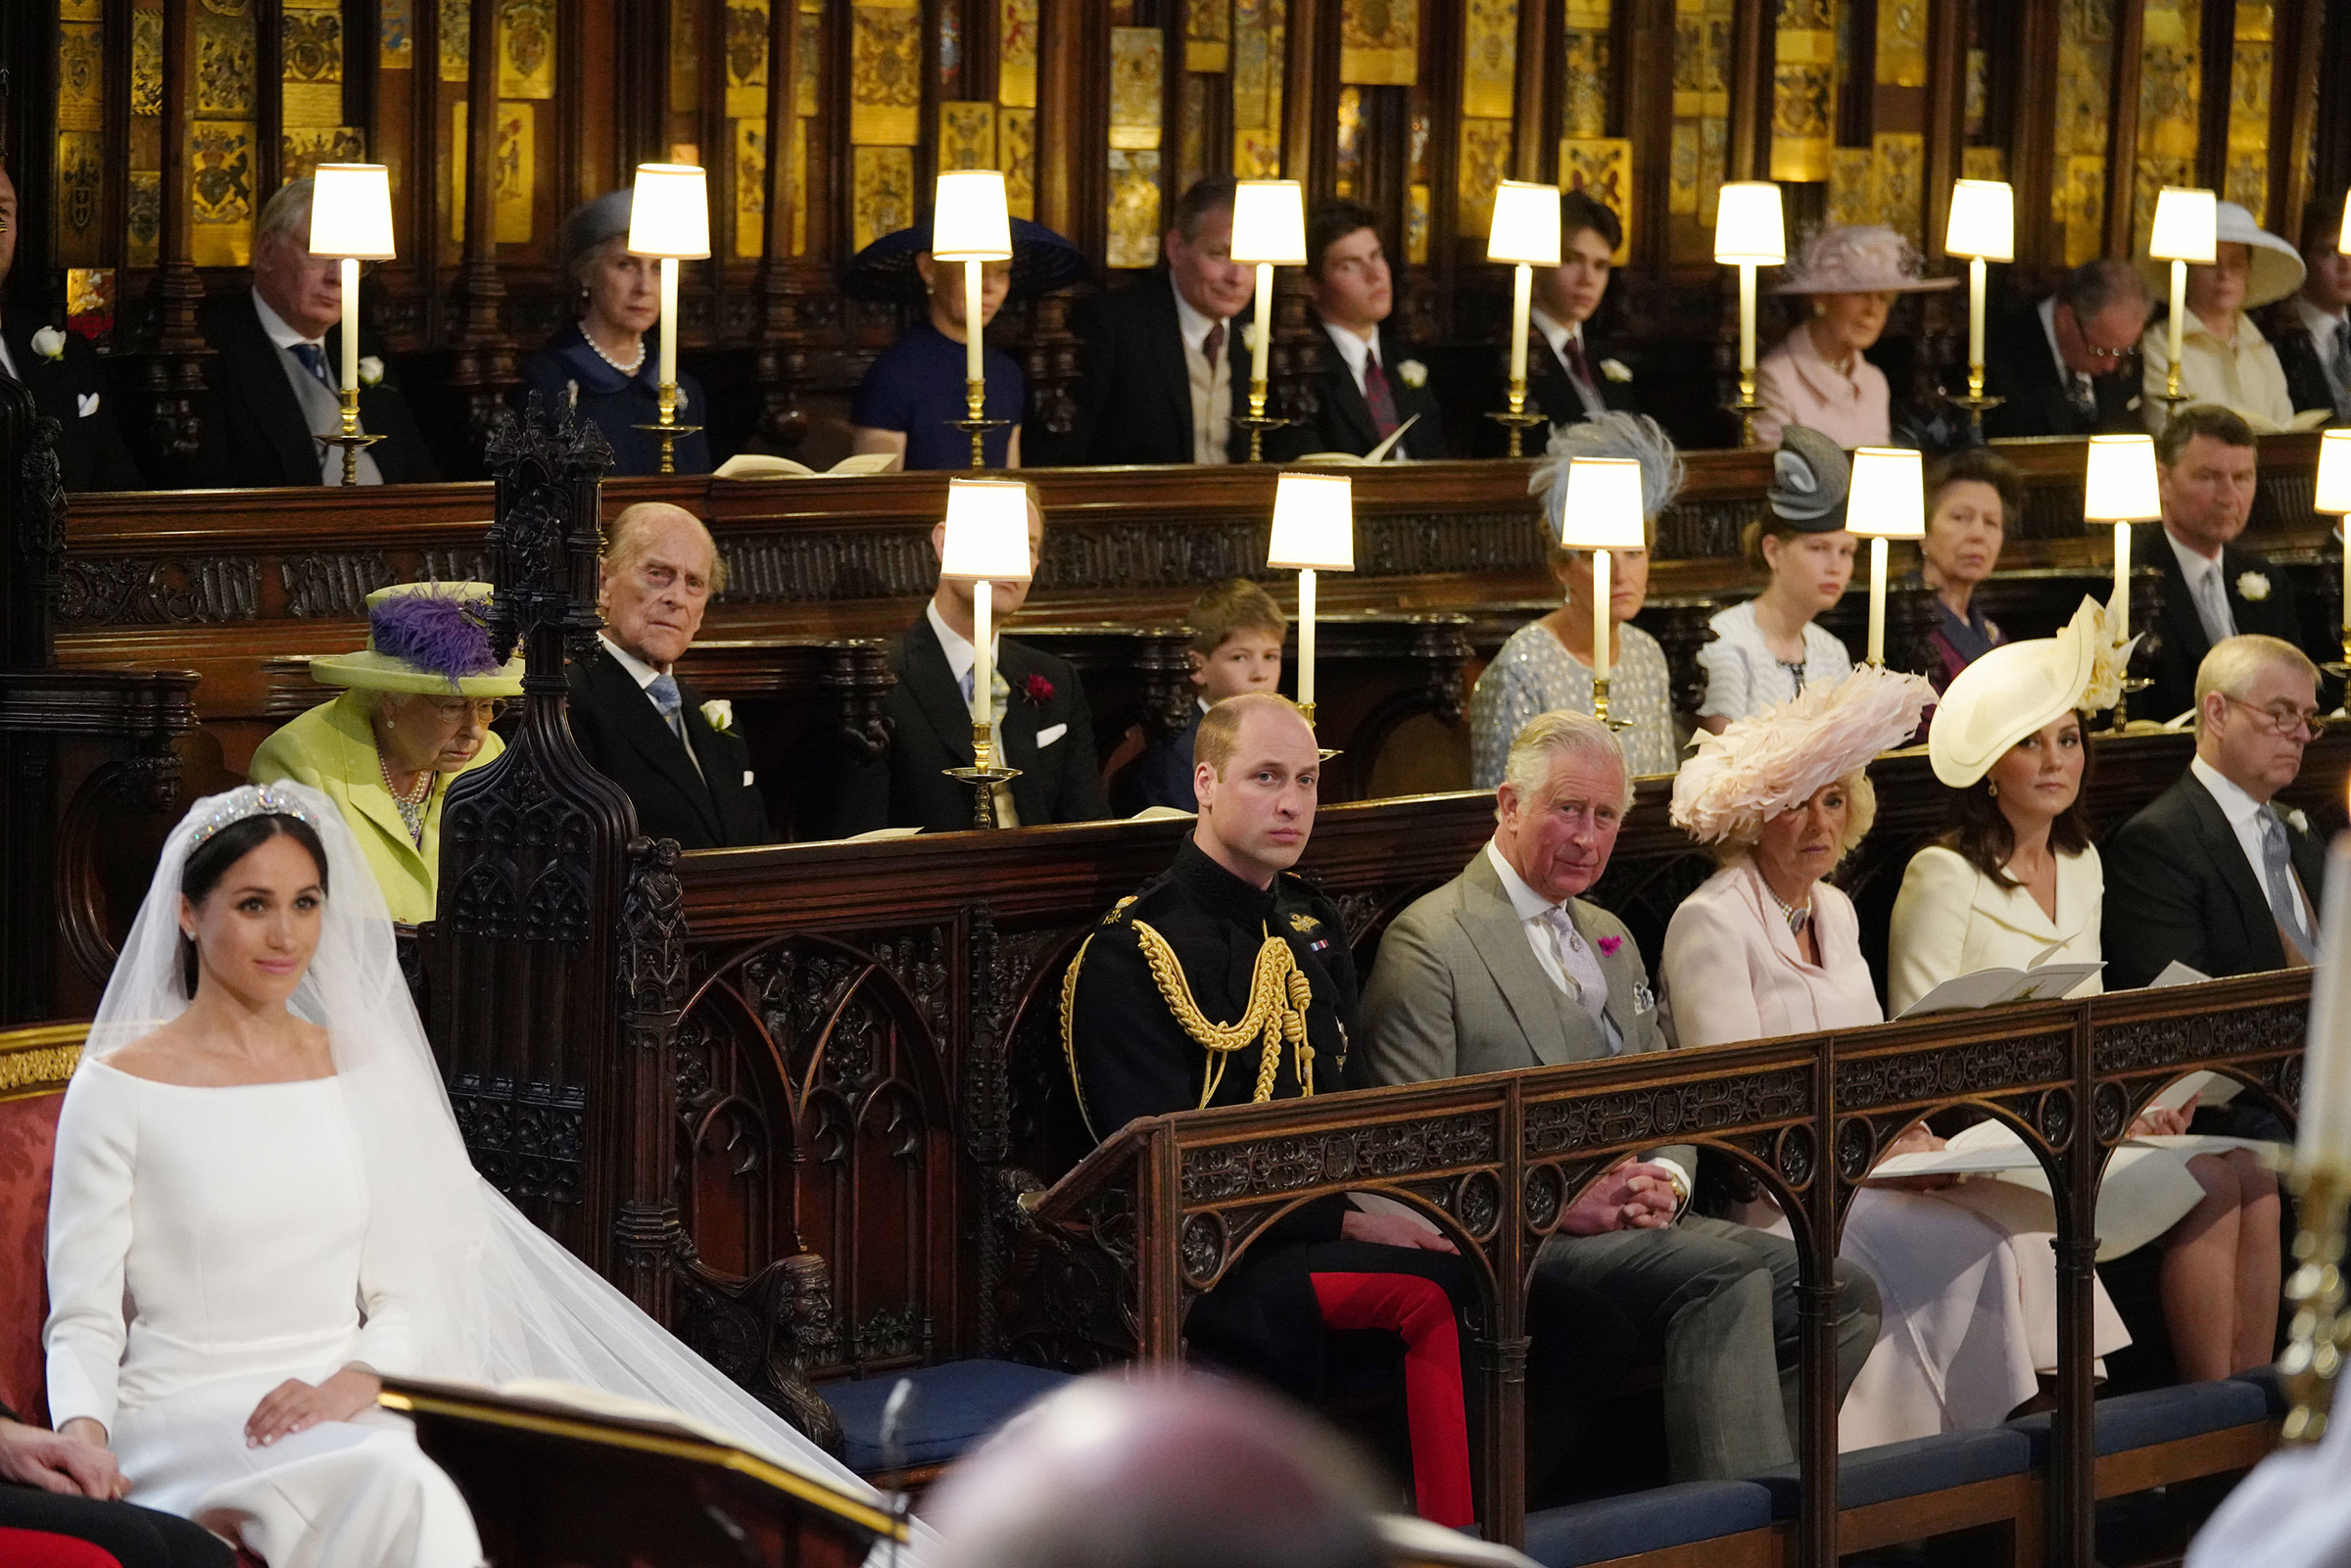 Prince Philip, Duke Edinburgh, attended the wedding of Meghan, Duchess of Sussex and Prince Harry in St George's Chapel, Windsor Castle on May 19, 2018.